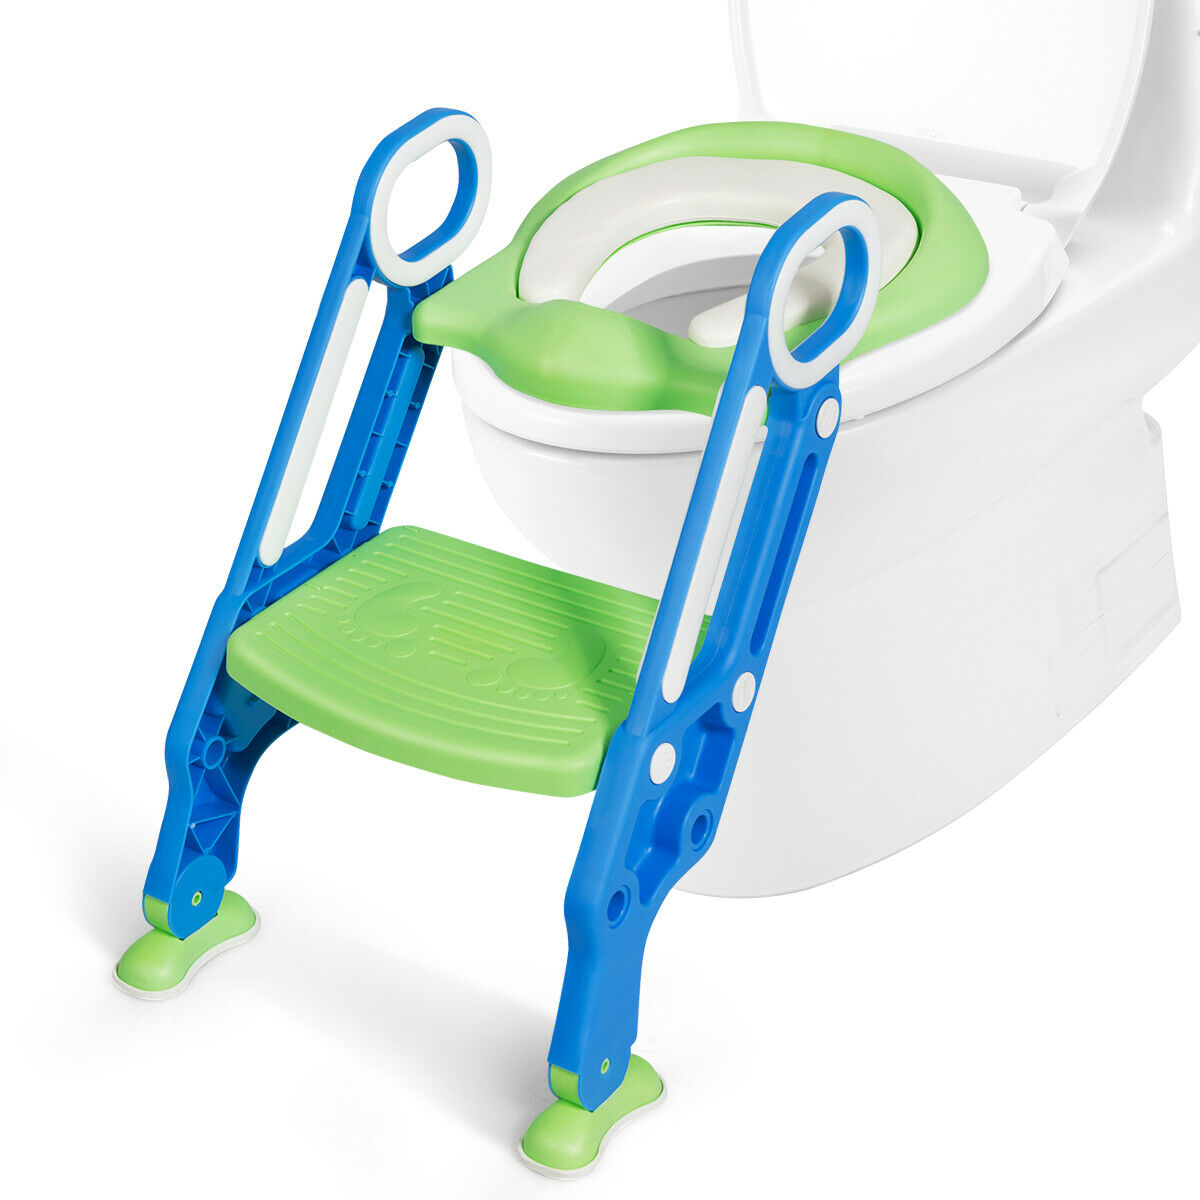 Foldable Potty Training Toilet Seat W/ Step Stool Ladder Adjustable For Kids